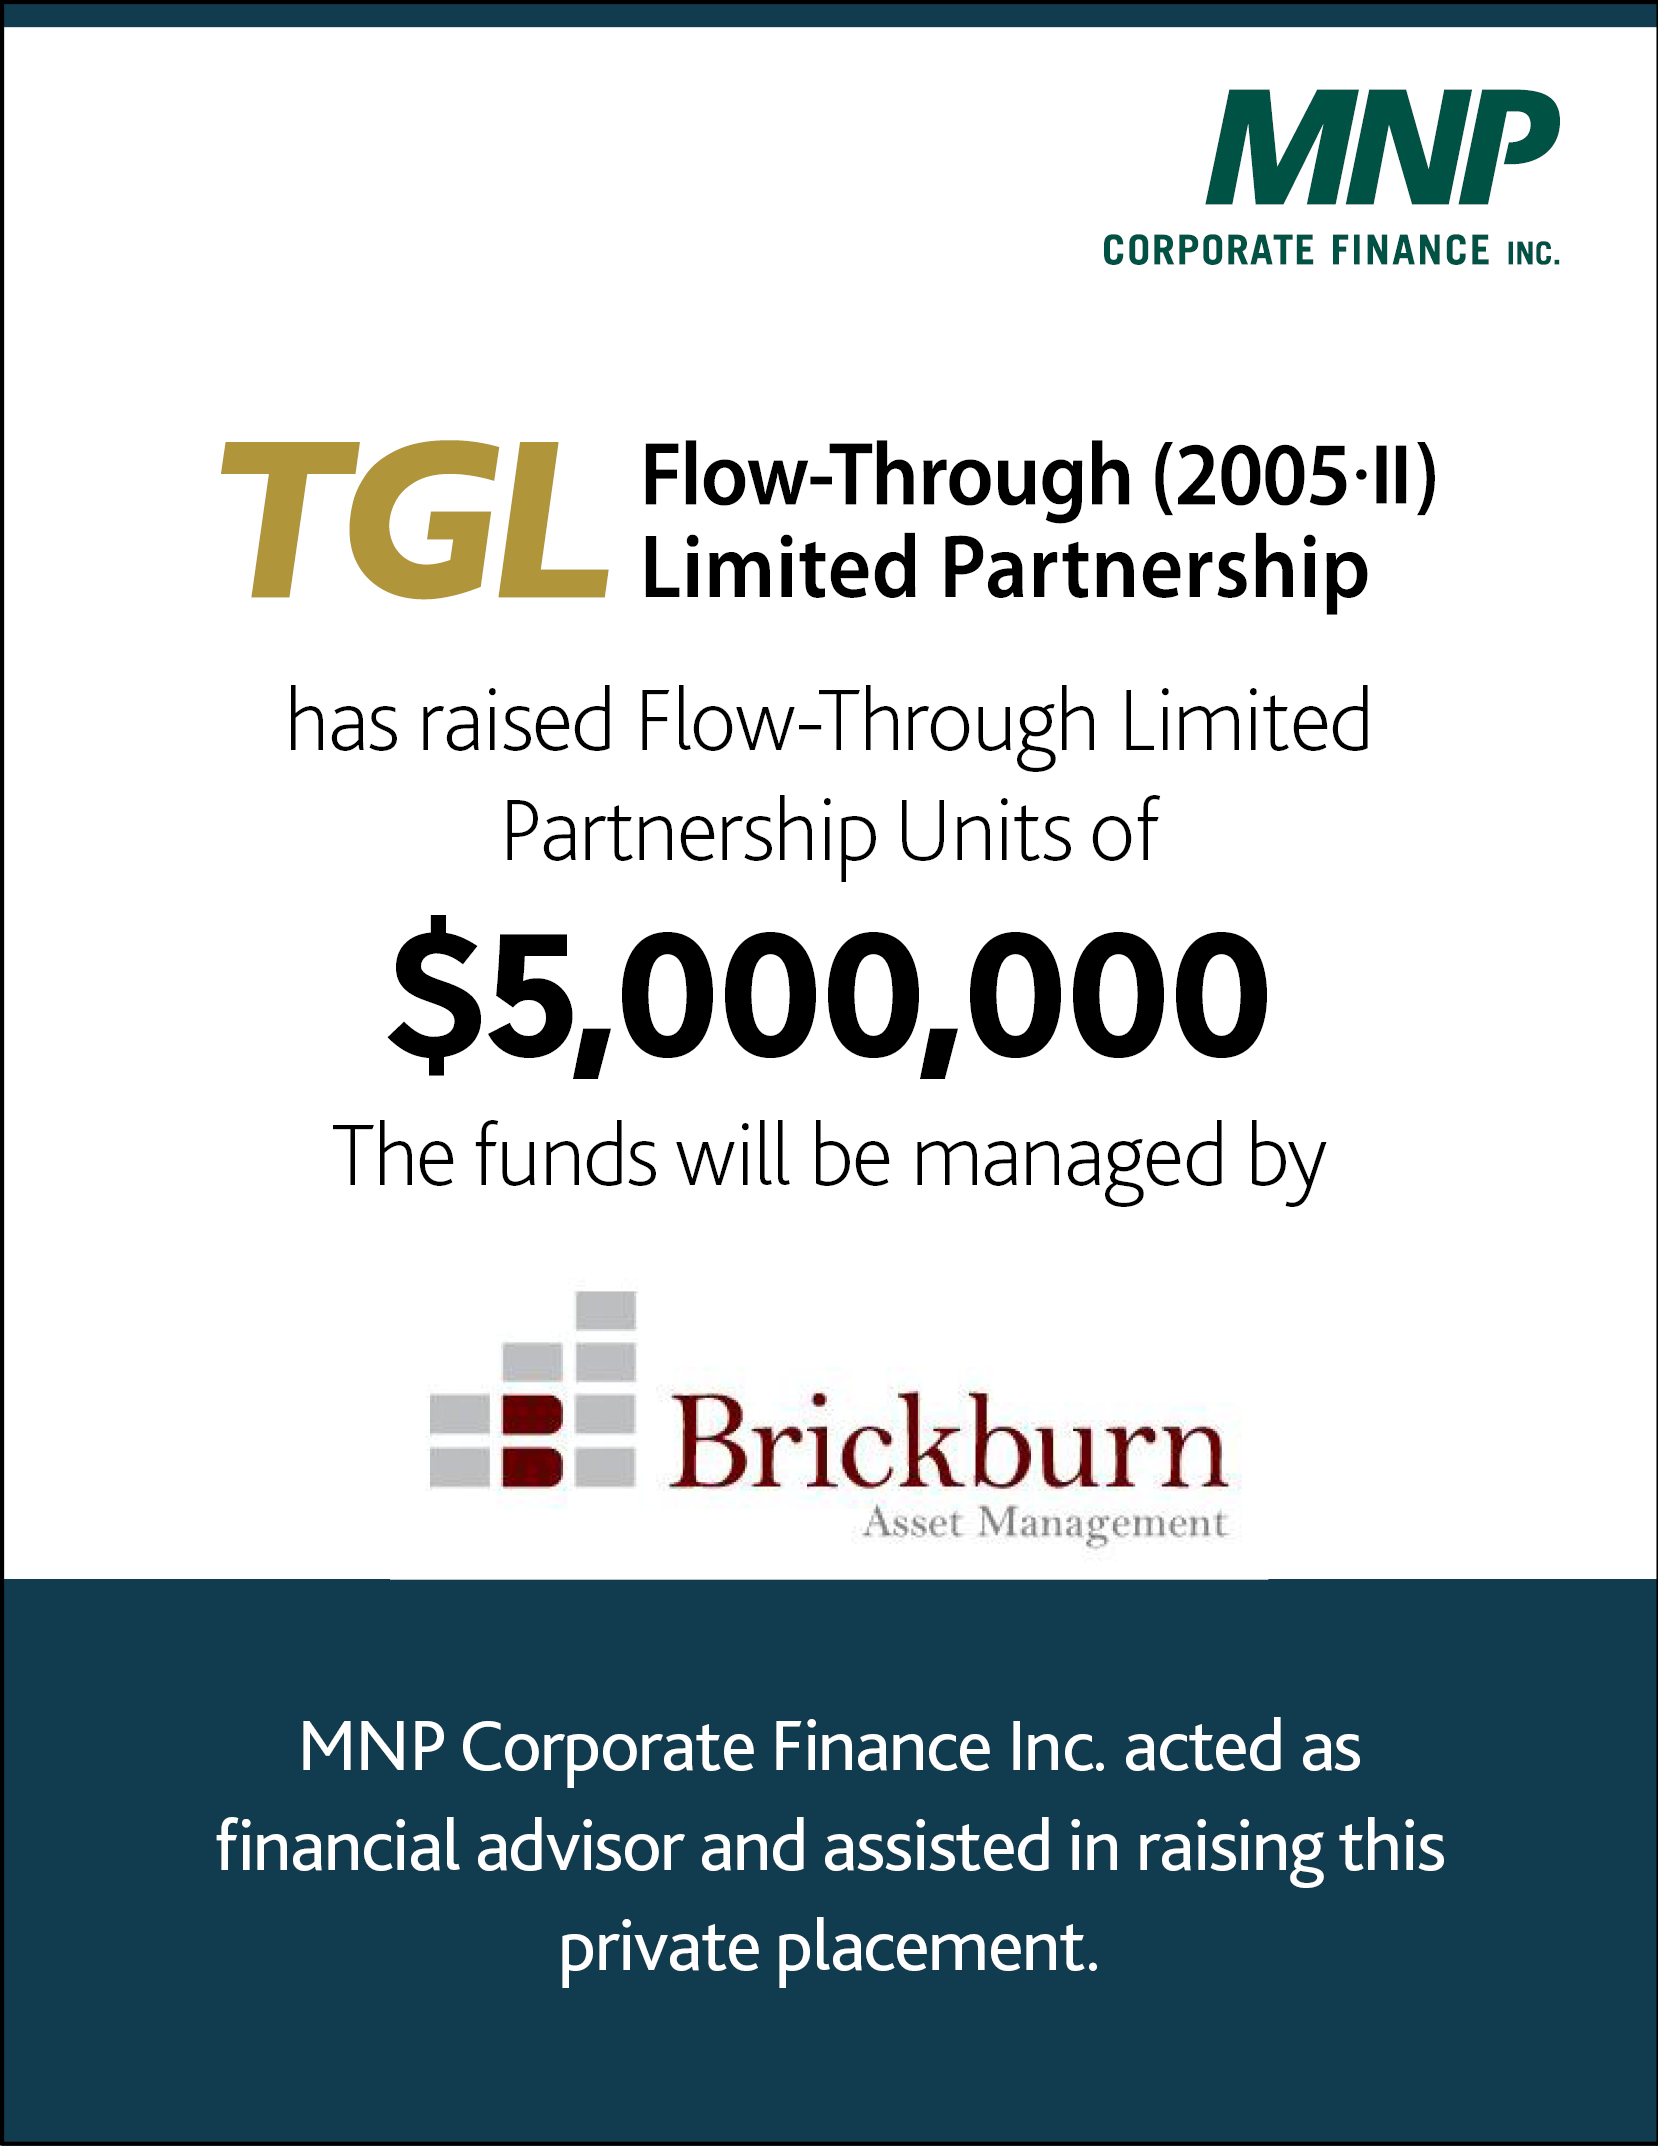 TGL Flow-Through (2005-II) has raised Flow-Through Limited Partnership Units of $5,000,000 The funds will be managed by Brickburn Asset Management 